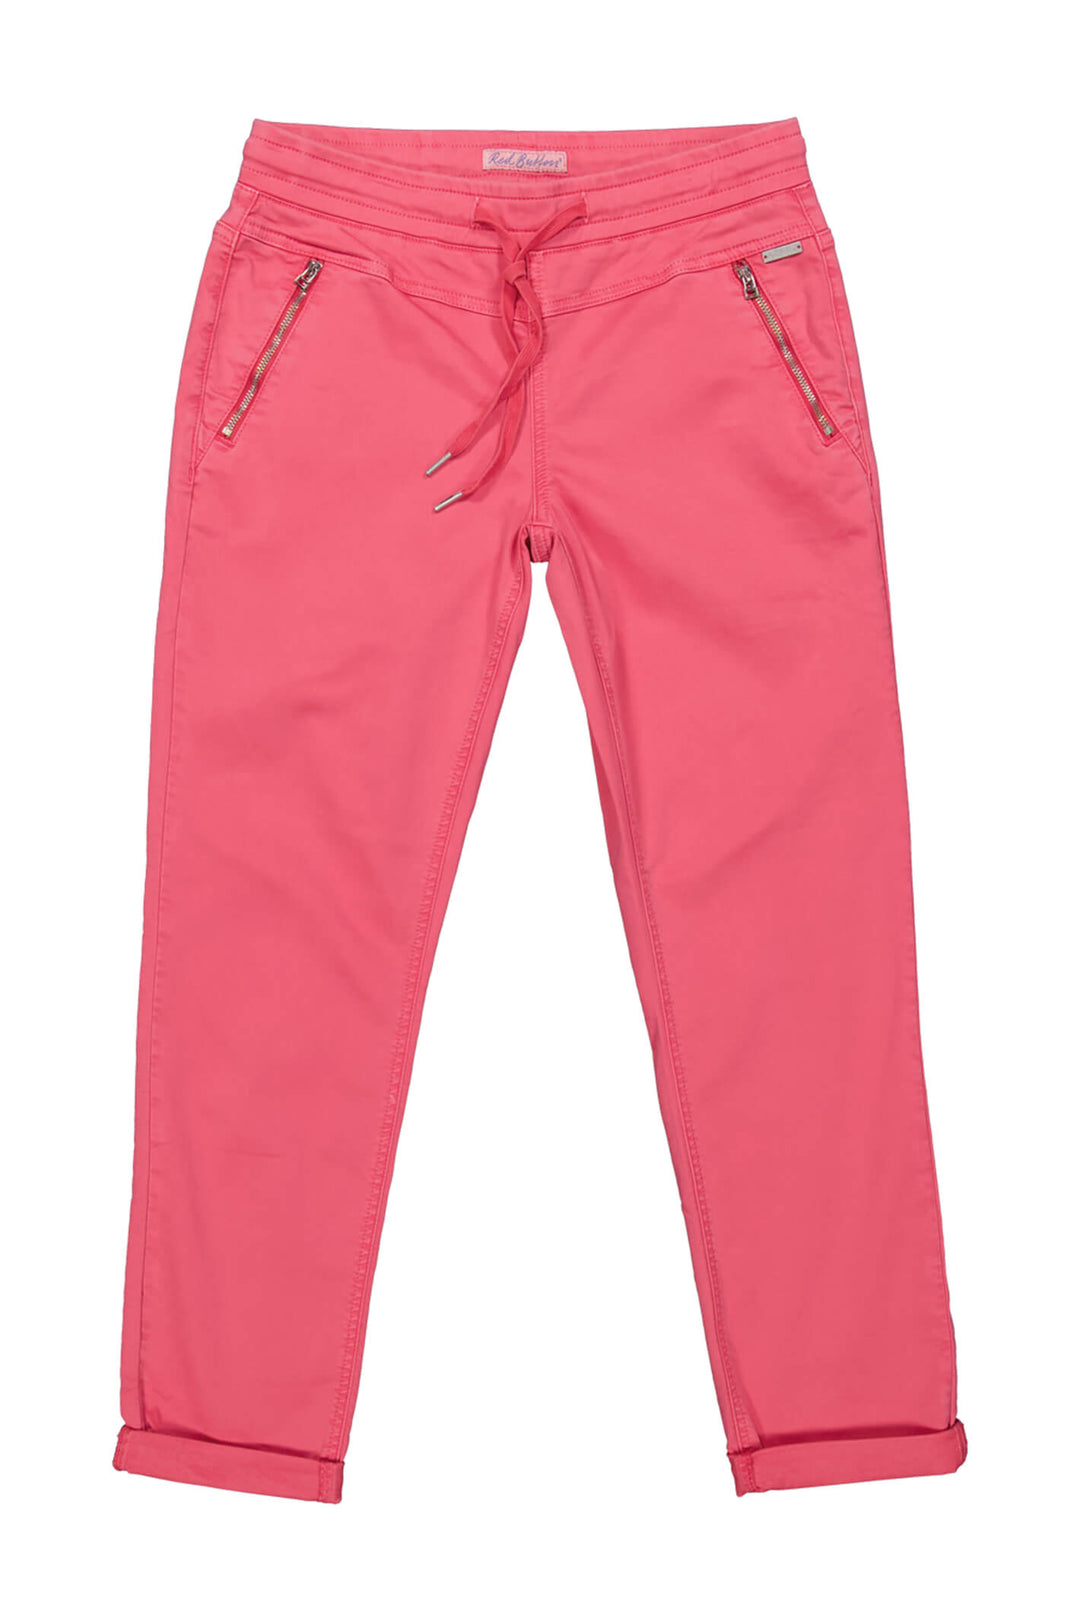 Red Button SRB3936 Raspberry Pink Tessy Crop Jogger Trousers - Olivia Grace Fashion